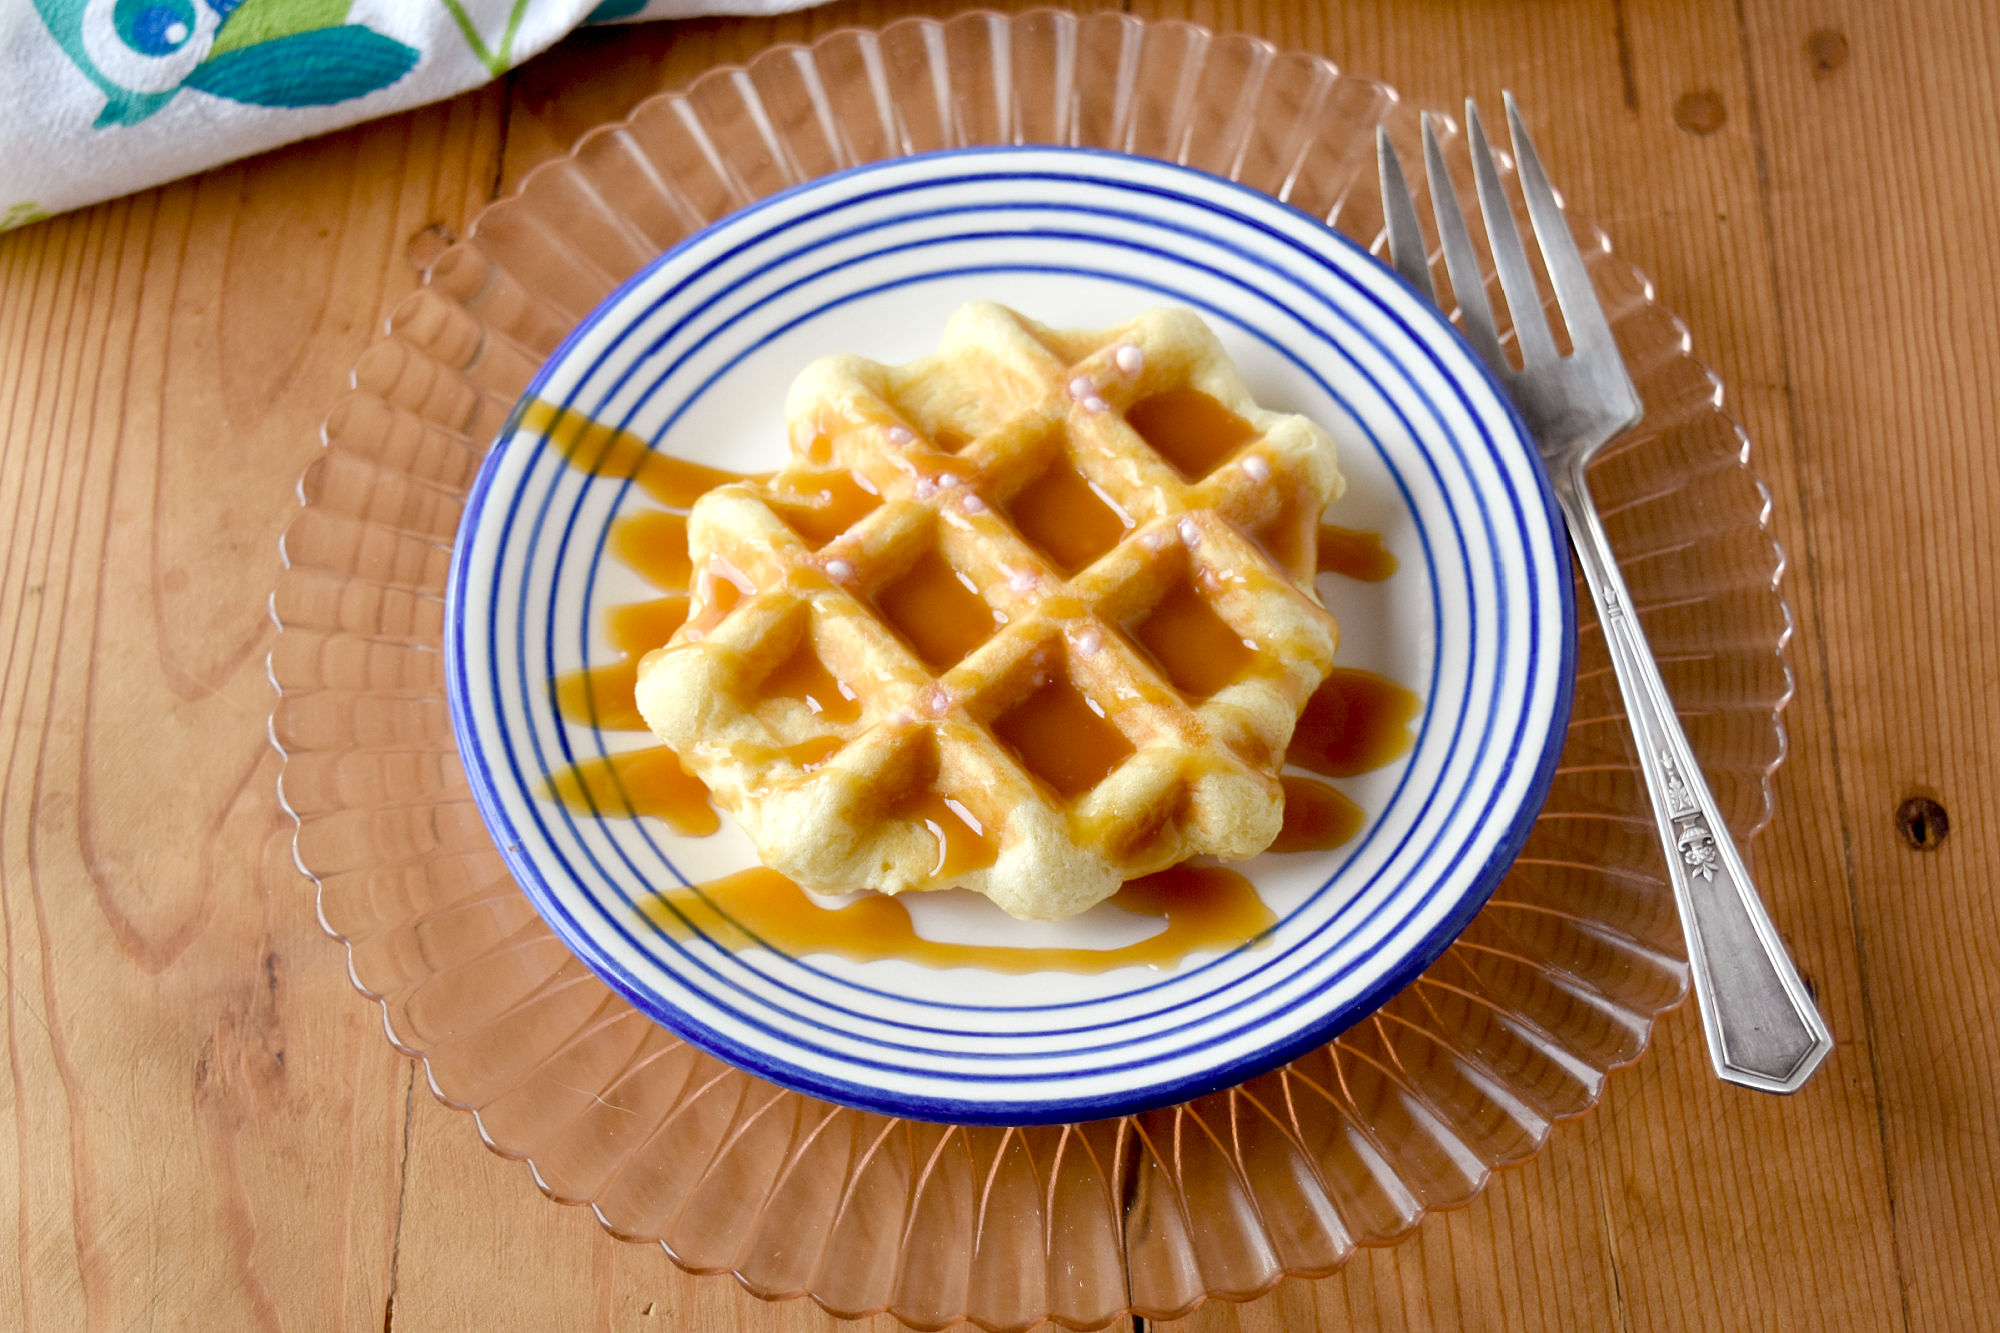 Peach Liège Waffles are a rich, yeast waffle that’s more bread than waffle.  They’re lightly sweet and packed with ripe peaches. #FarmersMarketWeek